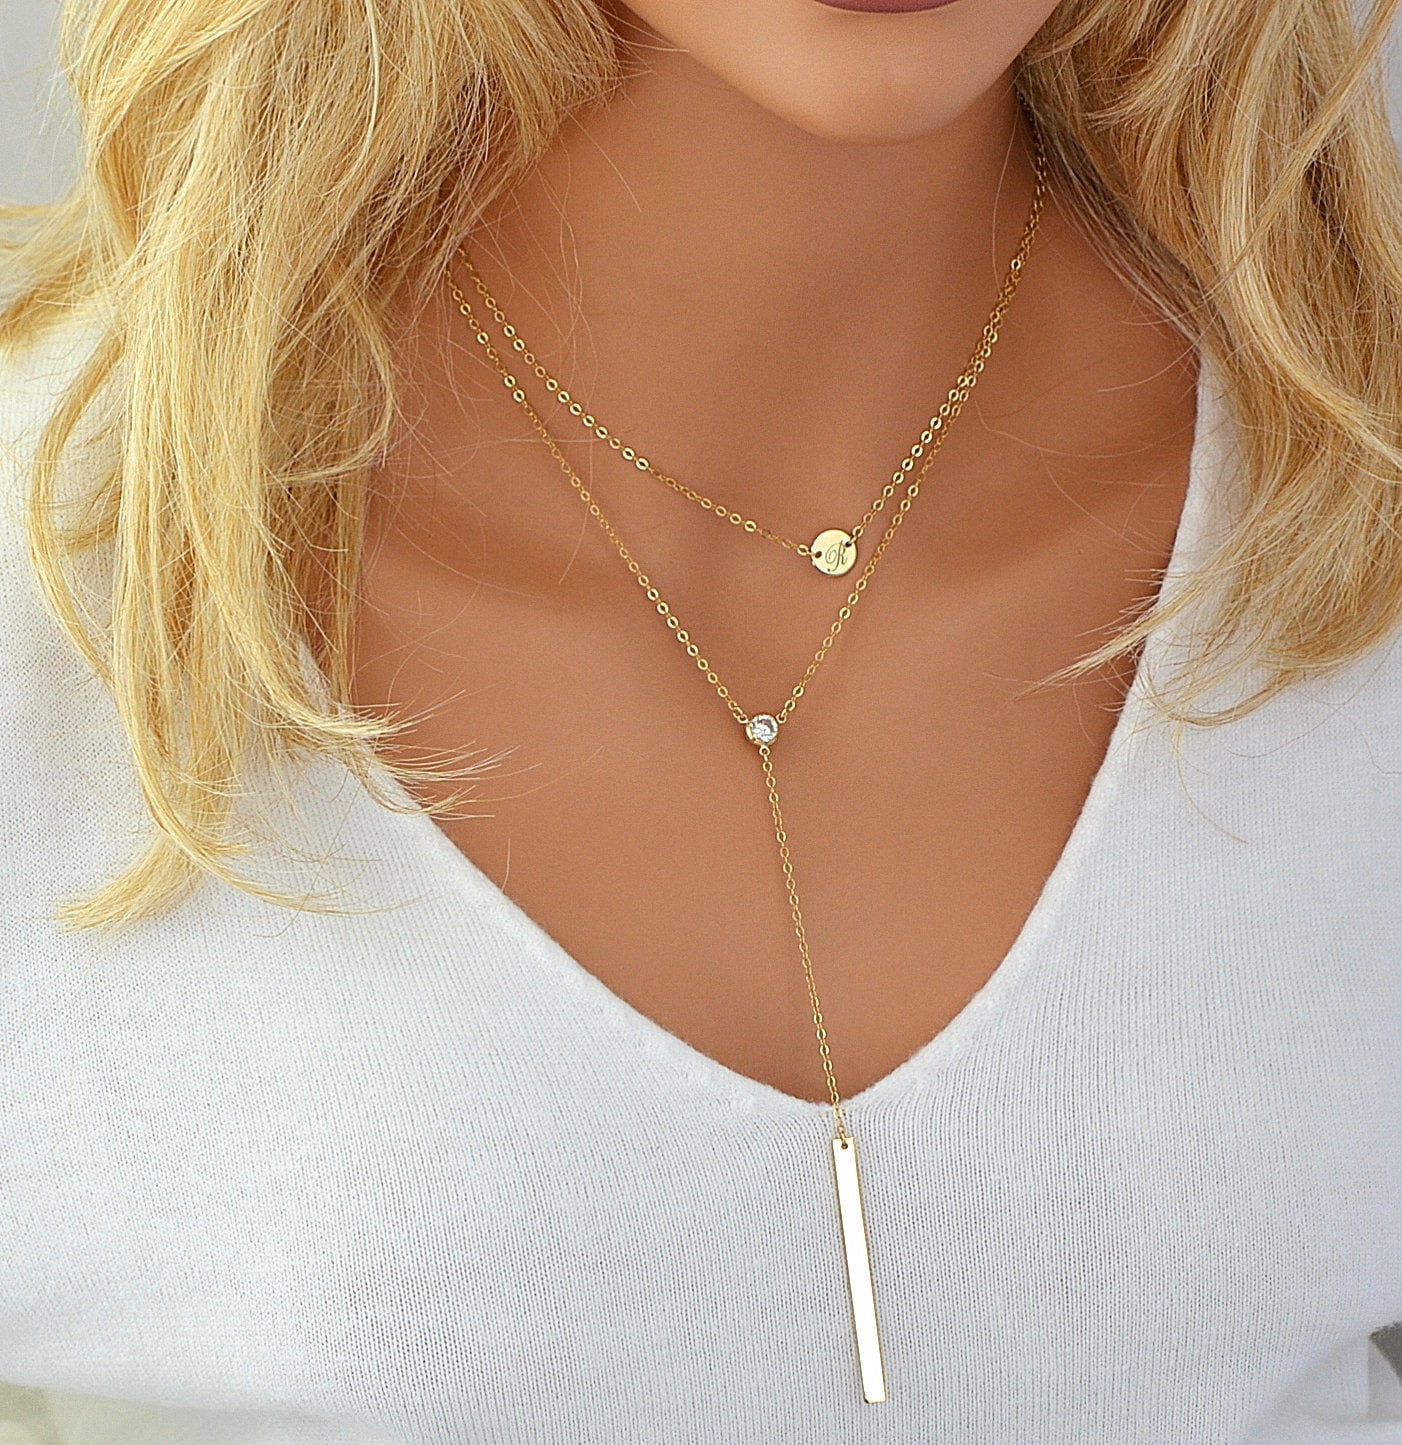 Layered Long Necklace Initial Necklace Long Gold Necklace